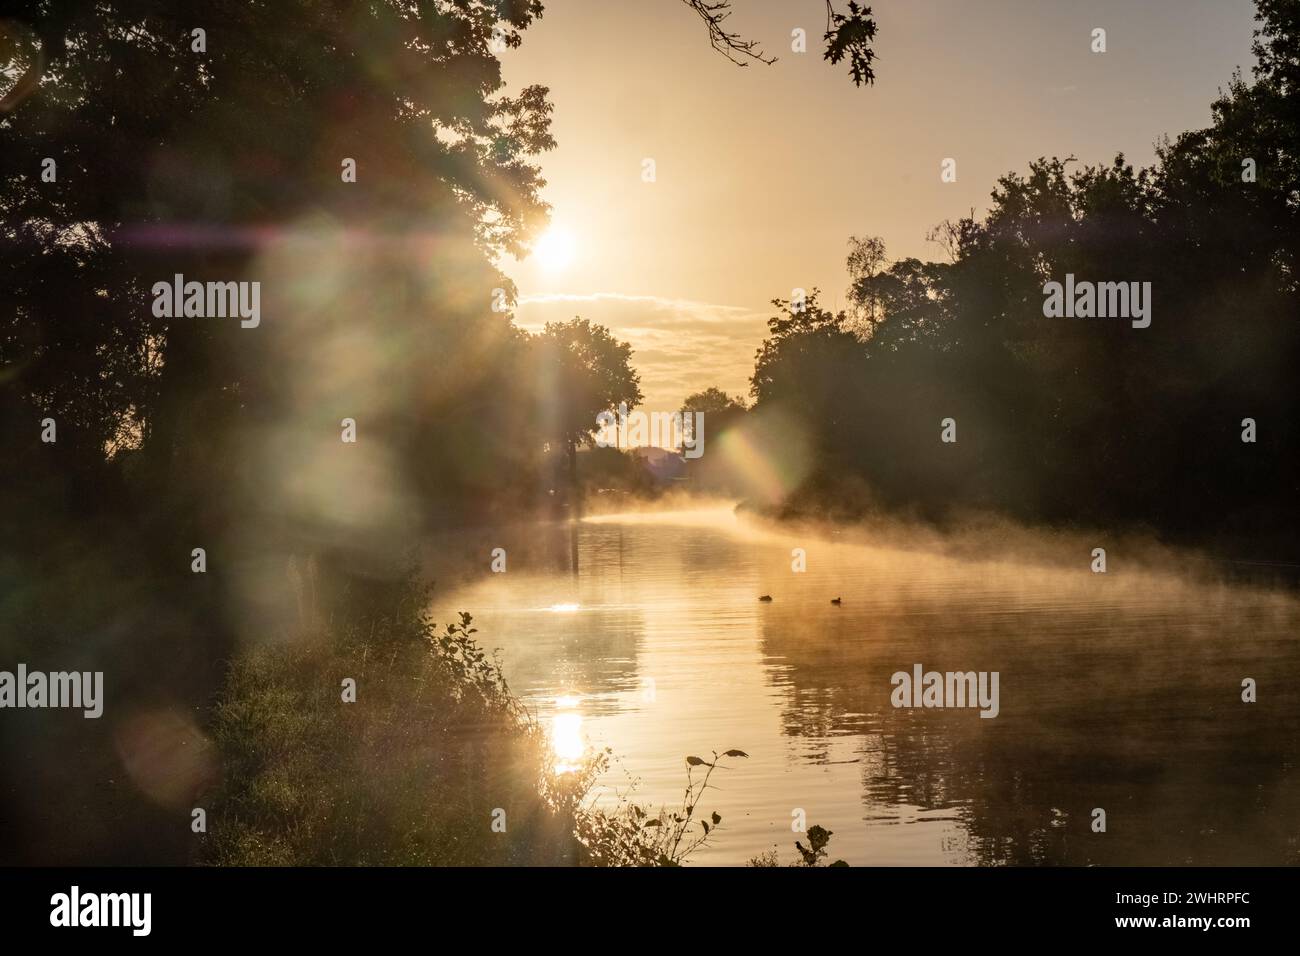 Mystical Sunset Mist Over Canal: Golden Rays Illuminating Tranquility Stock Photo